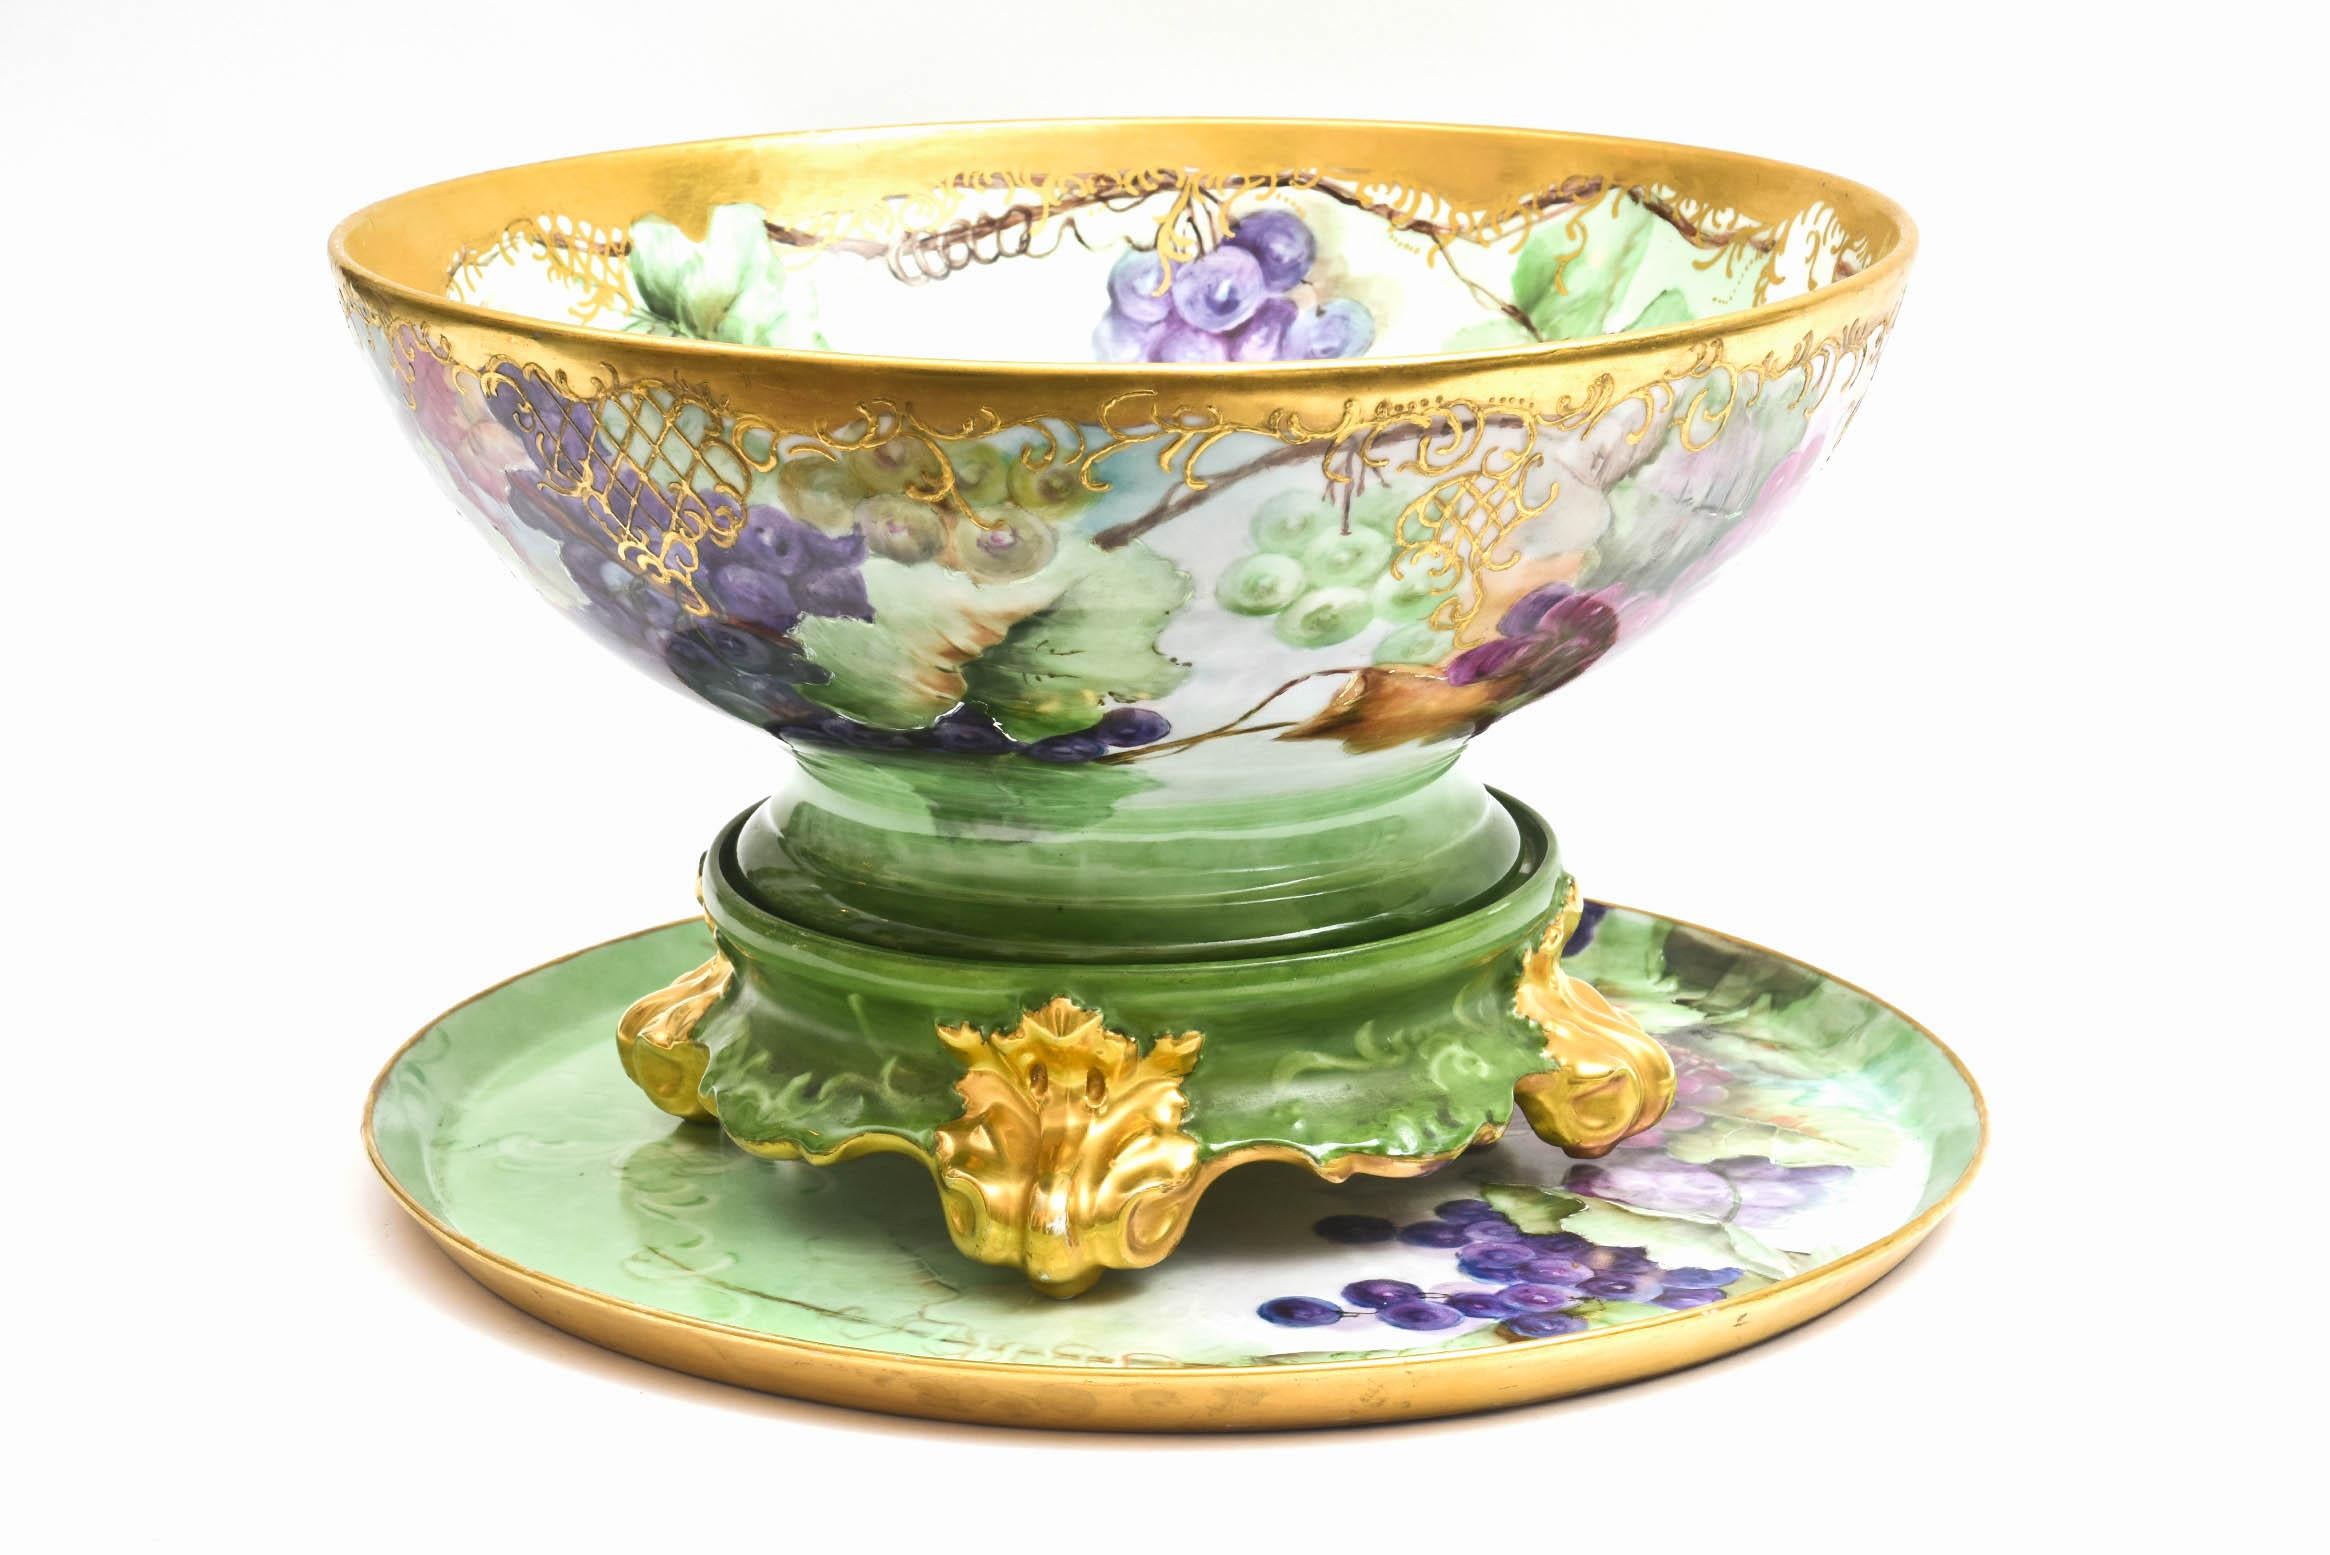 Late Victorian period era punch bowl and or centerpiece vividly hand painted. It is so hard to find all 3 pieces together. All over hand painted with raised gilt accents and a nicely shaped pedestal bowl with a stand featuring richly gilded feet.